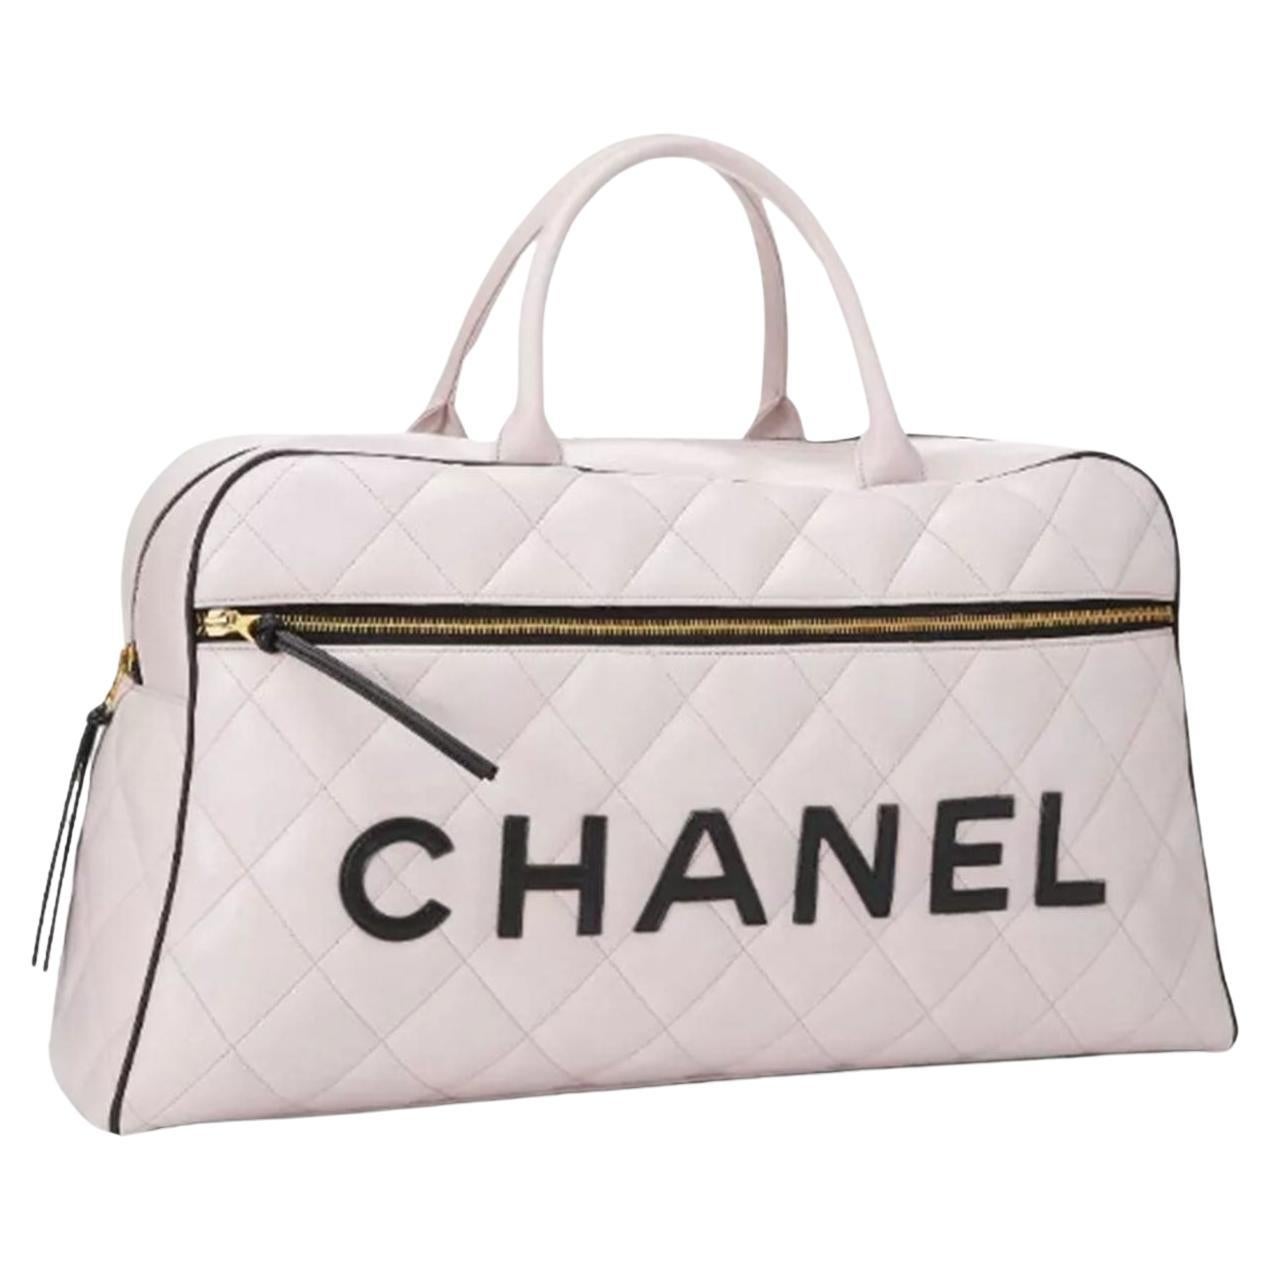 Chanel Limited Edition Vintage Duffel Tote White and Black Leather Weekend Bag For Sale